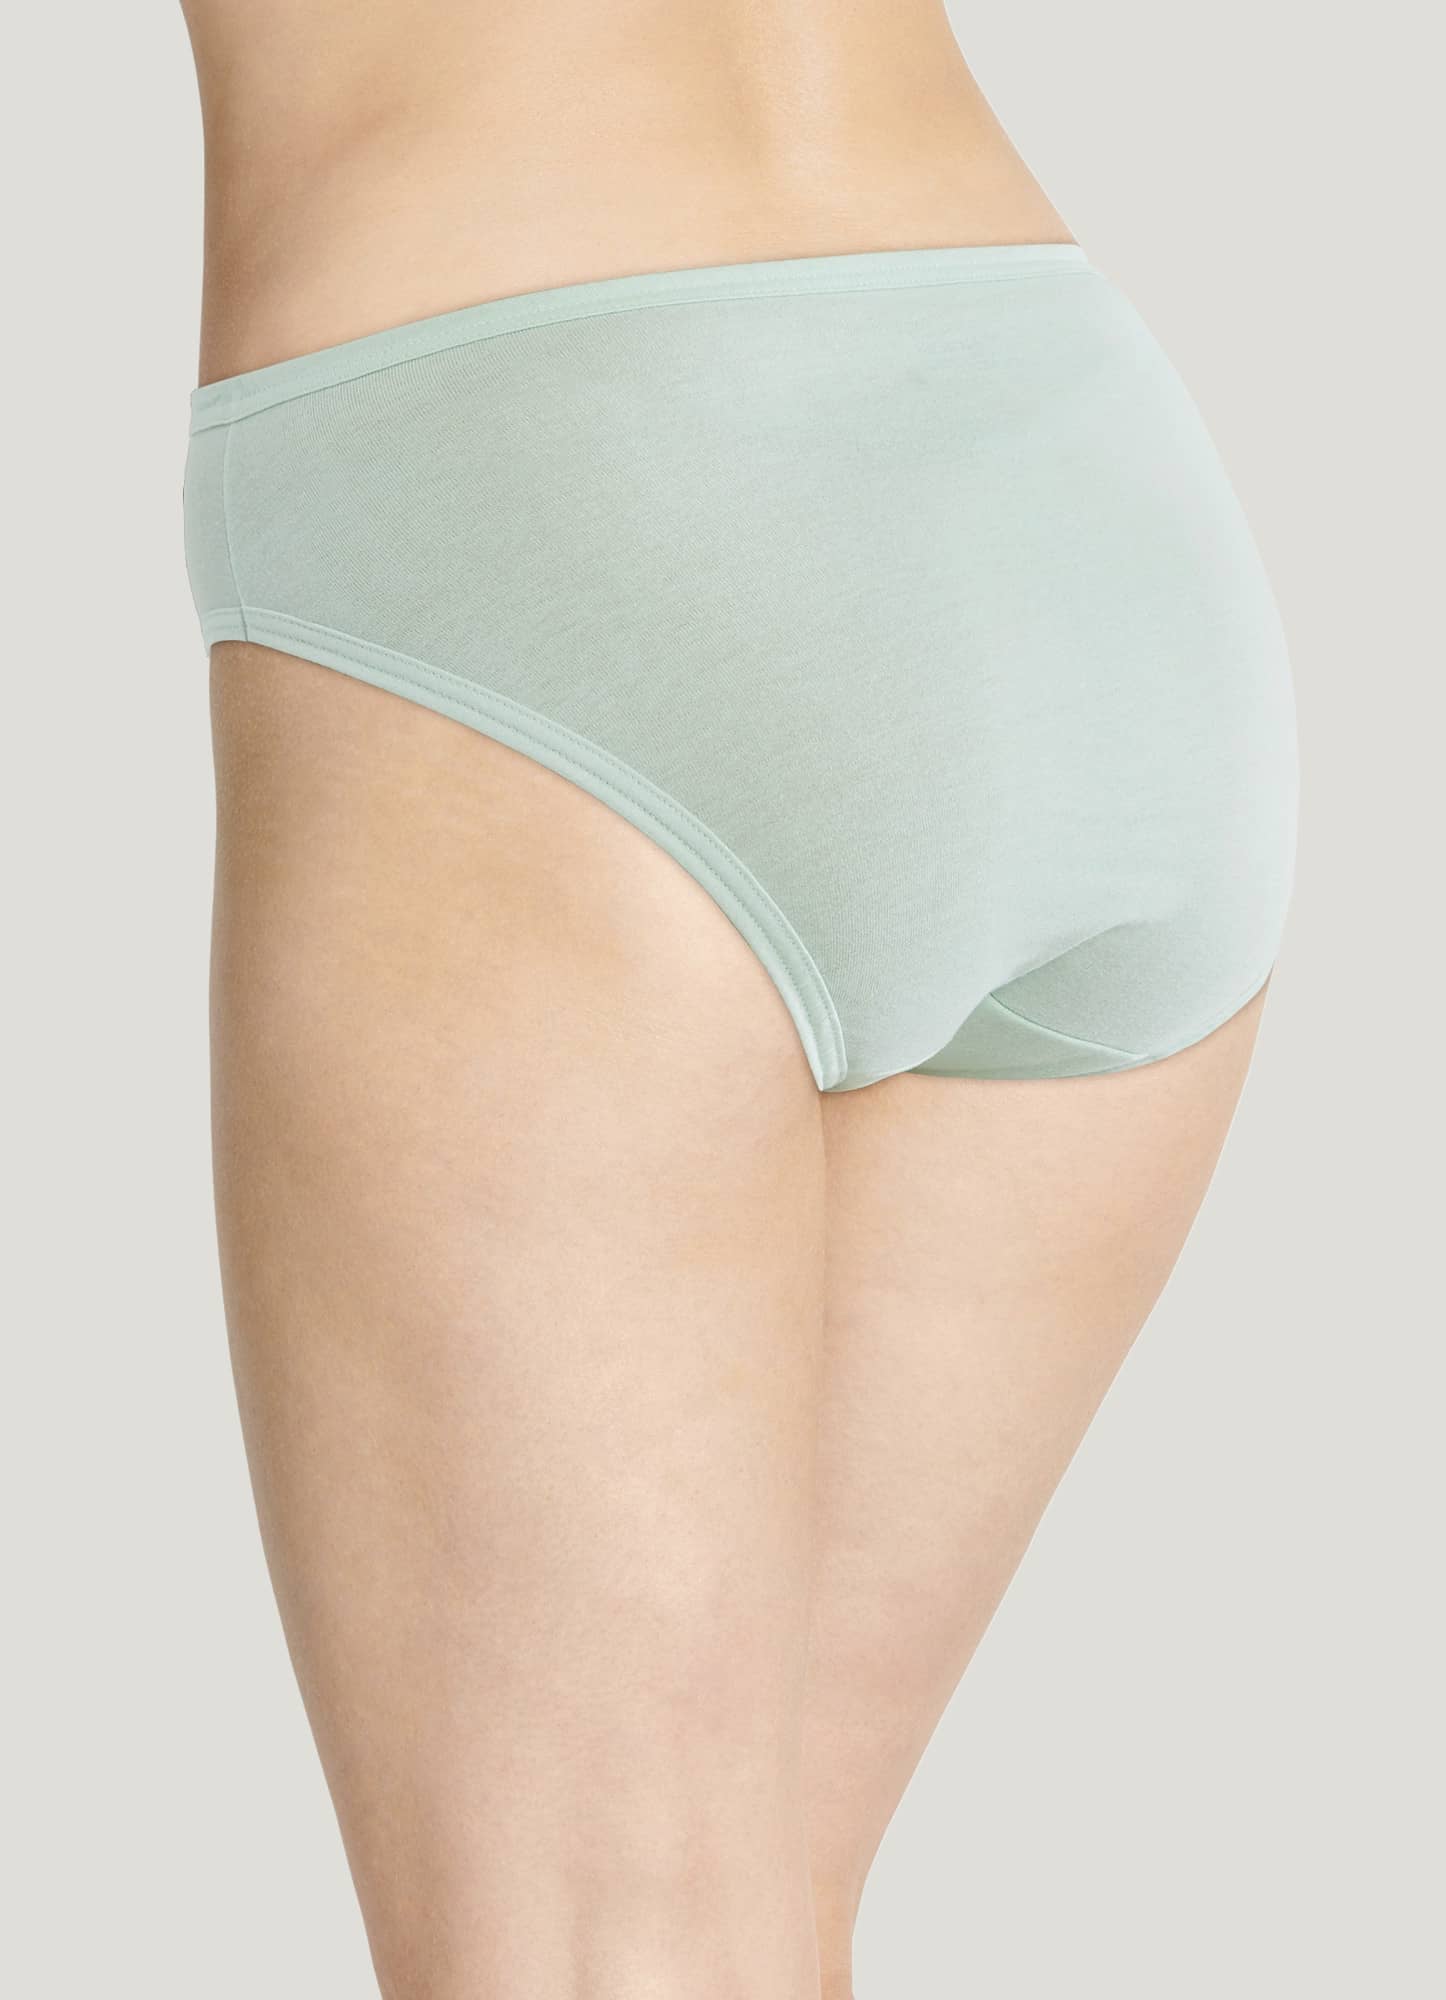 Ladies Underwear Pack of 3 - Sleek Blue, mint green, and Classic Pink color  Panties for everyday